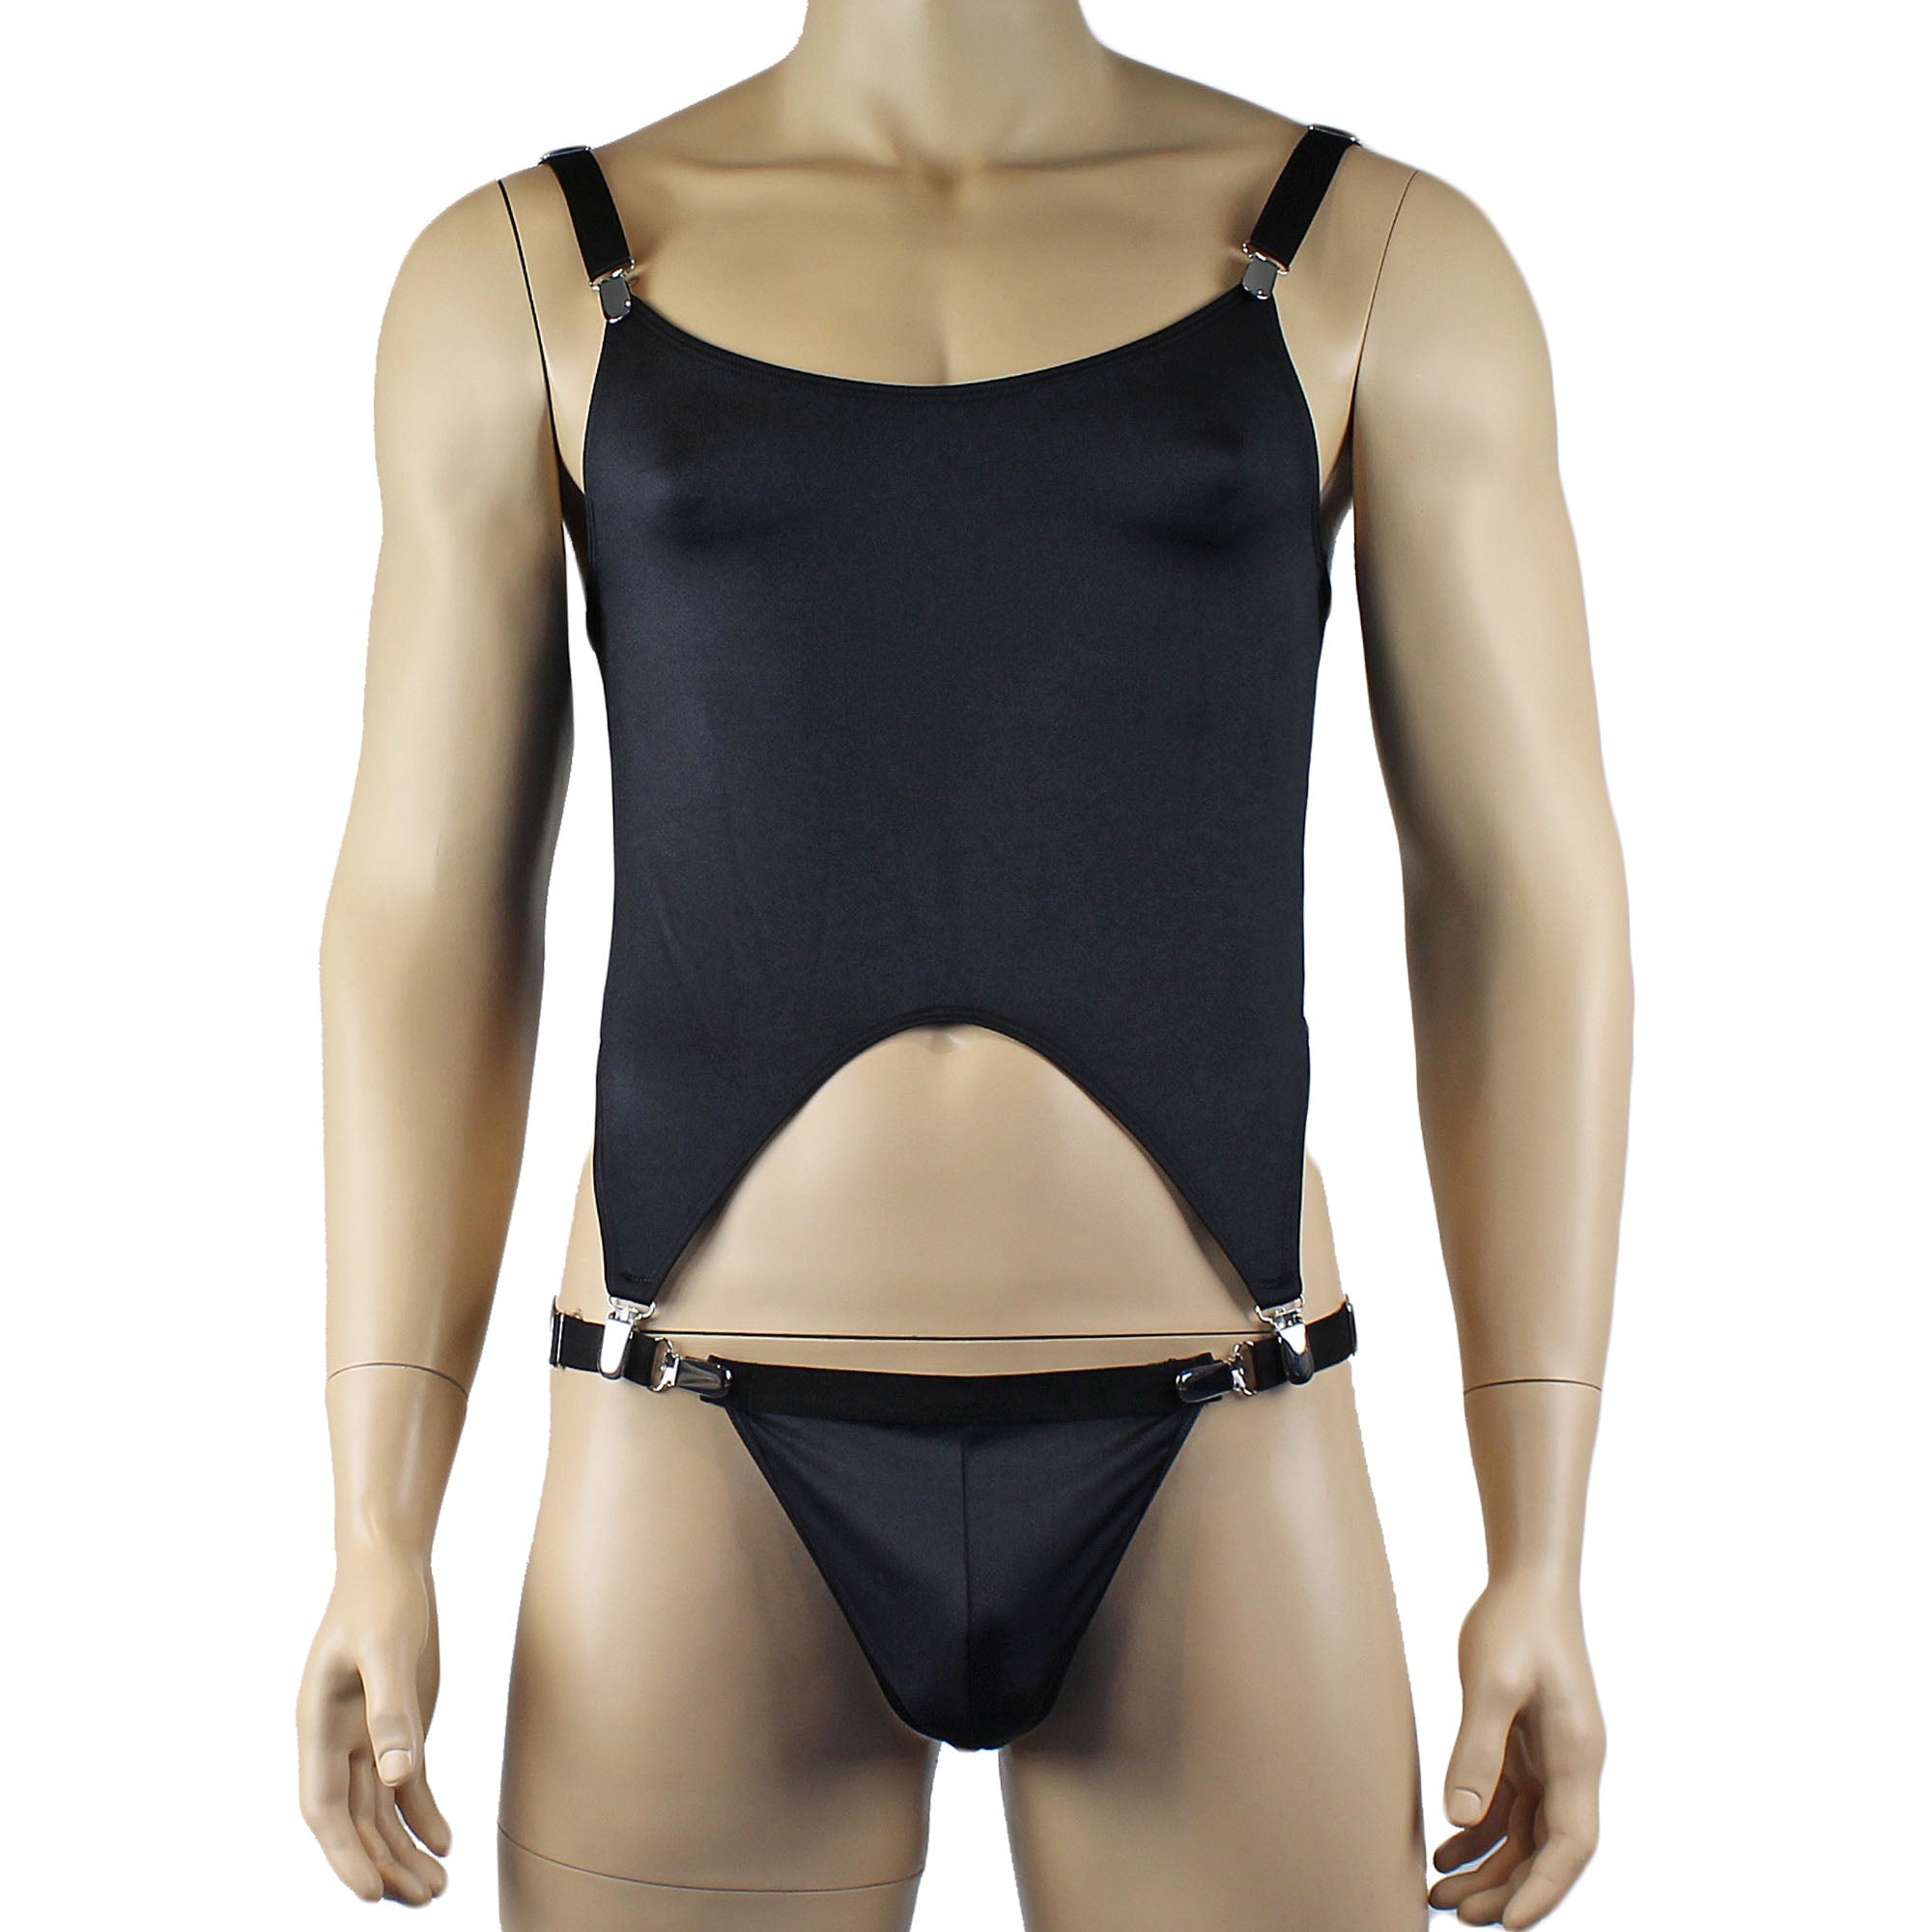 Mens Janice Corset Top and Thong with Metal Clips - Sizes up to 3XL